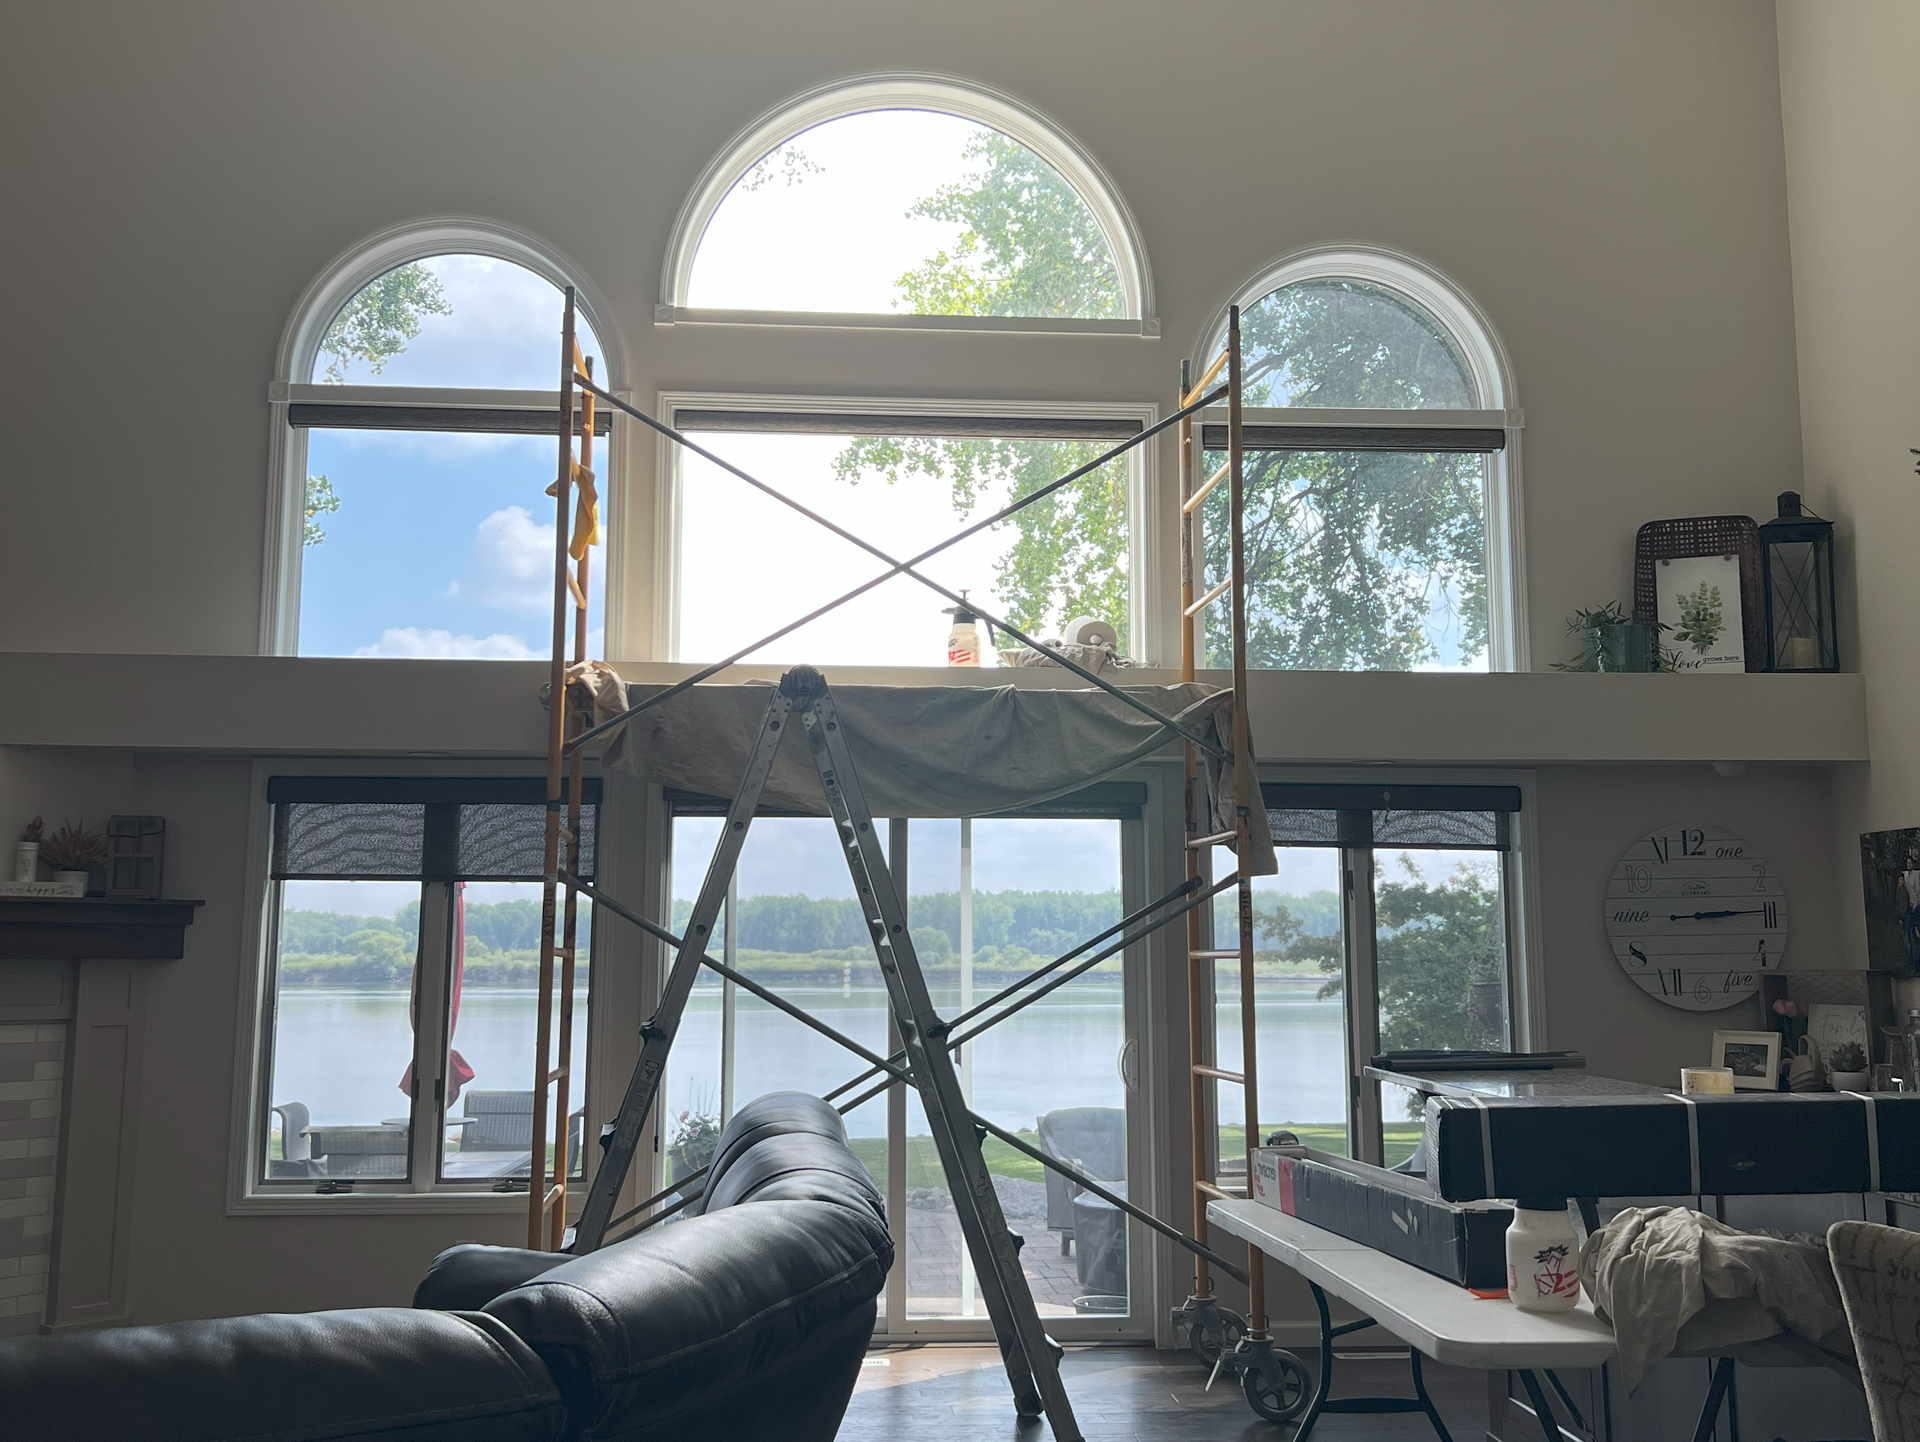 A living room with a lot of windows and a ladder in the middle of the room.